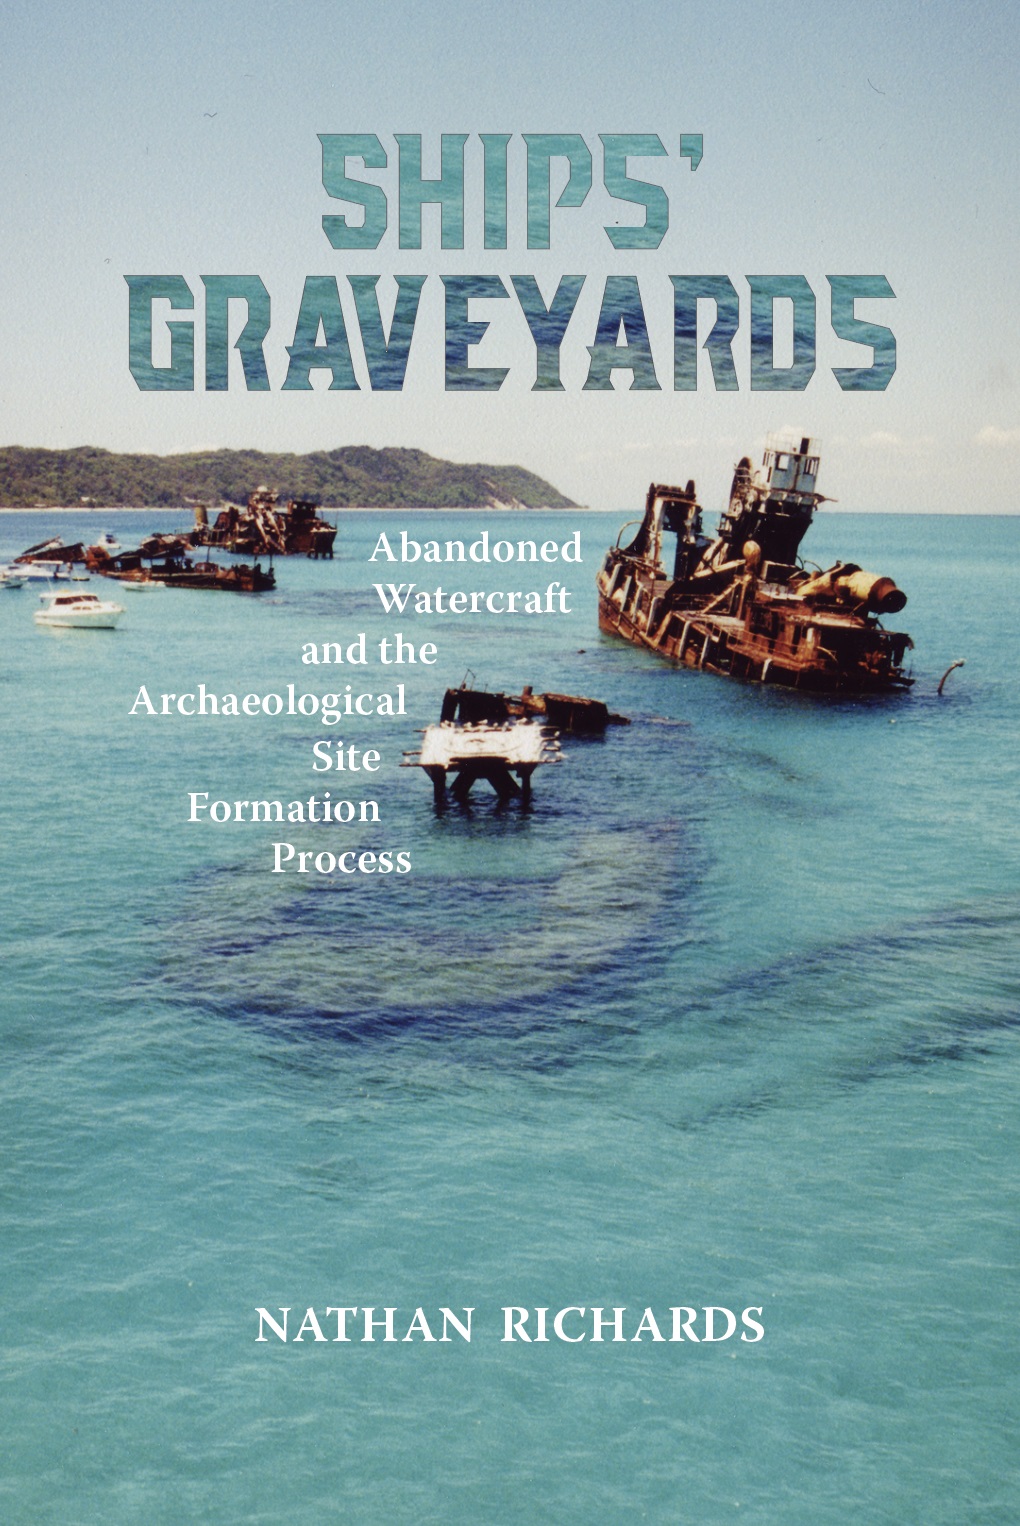 SHIPS' GRAVEYARDS: ABANDONED WATERCRAFT AND THE ARCHAEOLOGICAL SITE FORMATION PROCESS